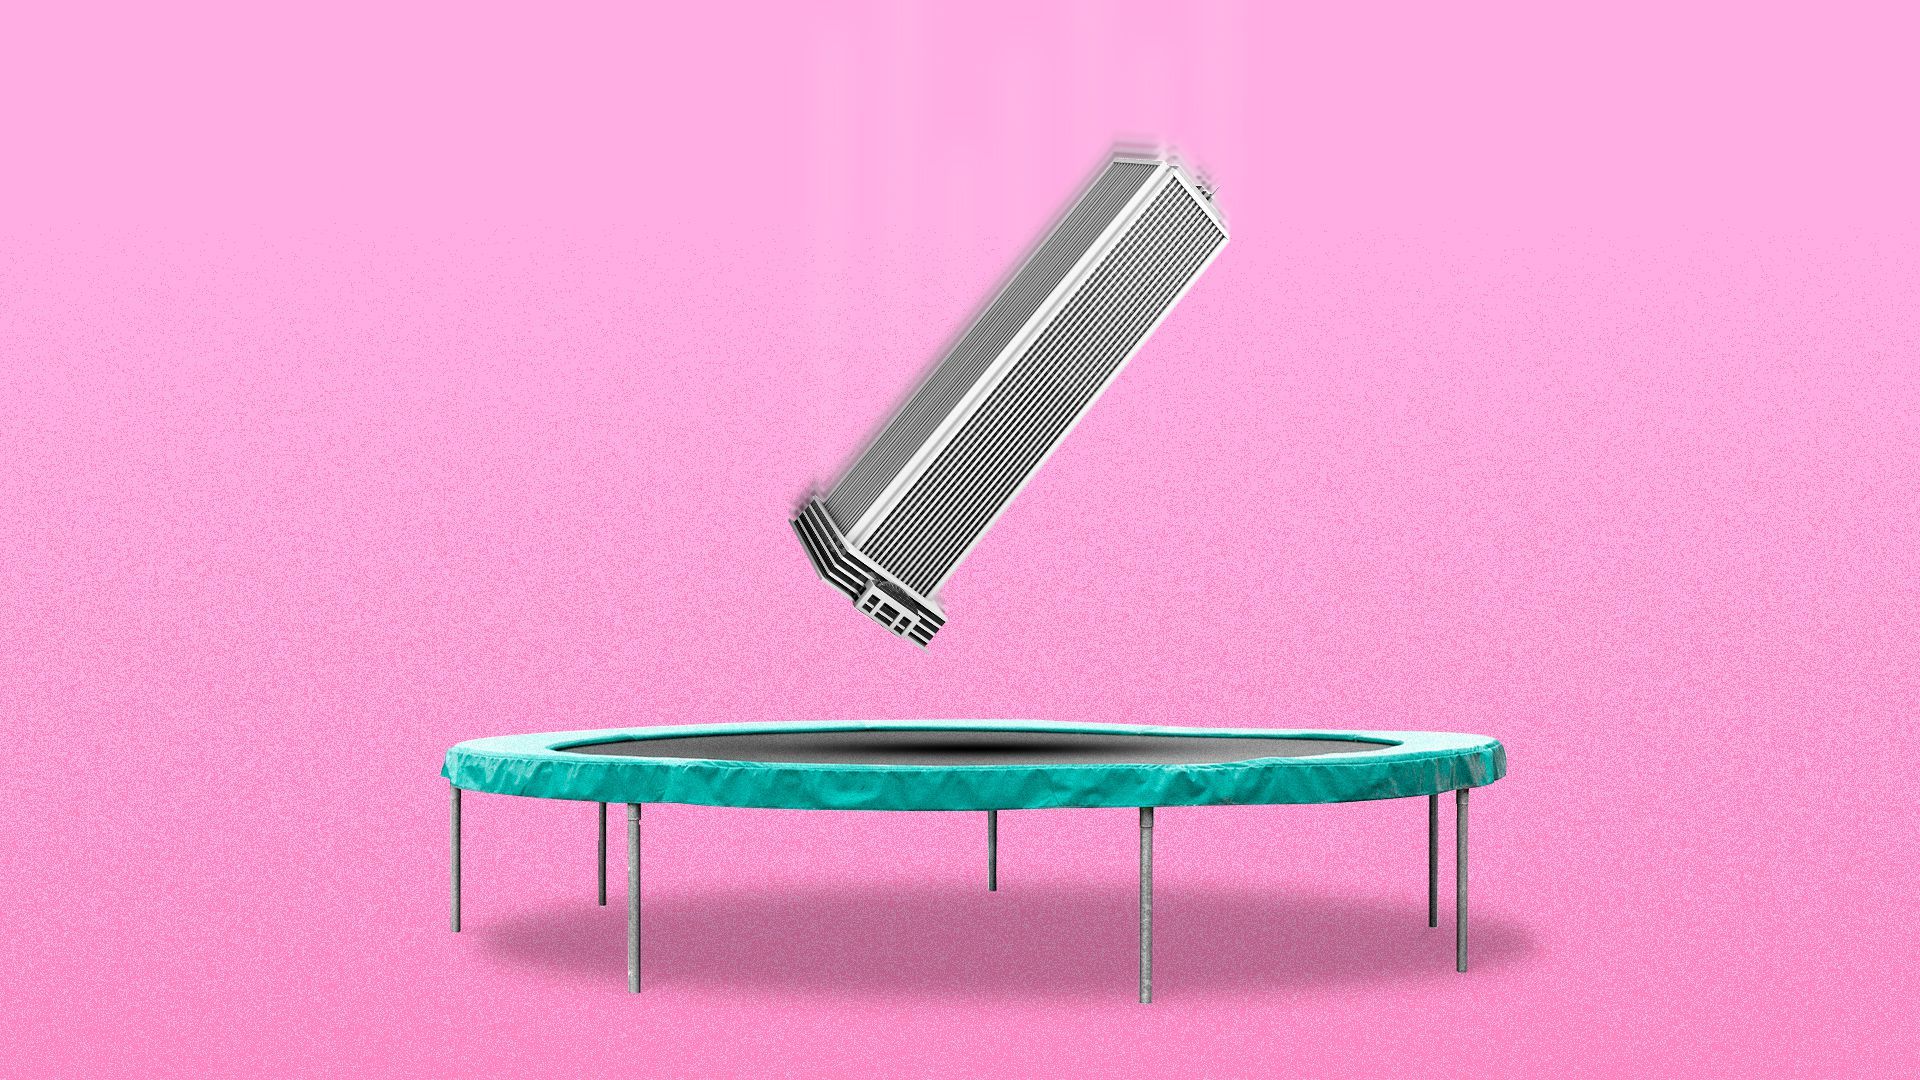 An illustration of a building on a trampoline.